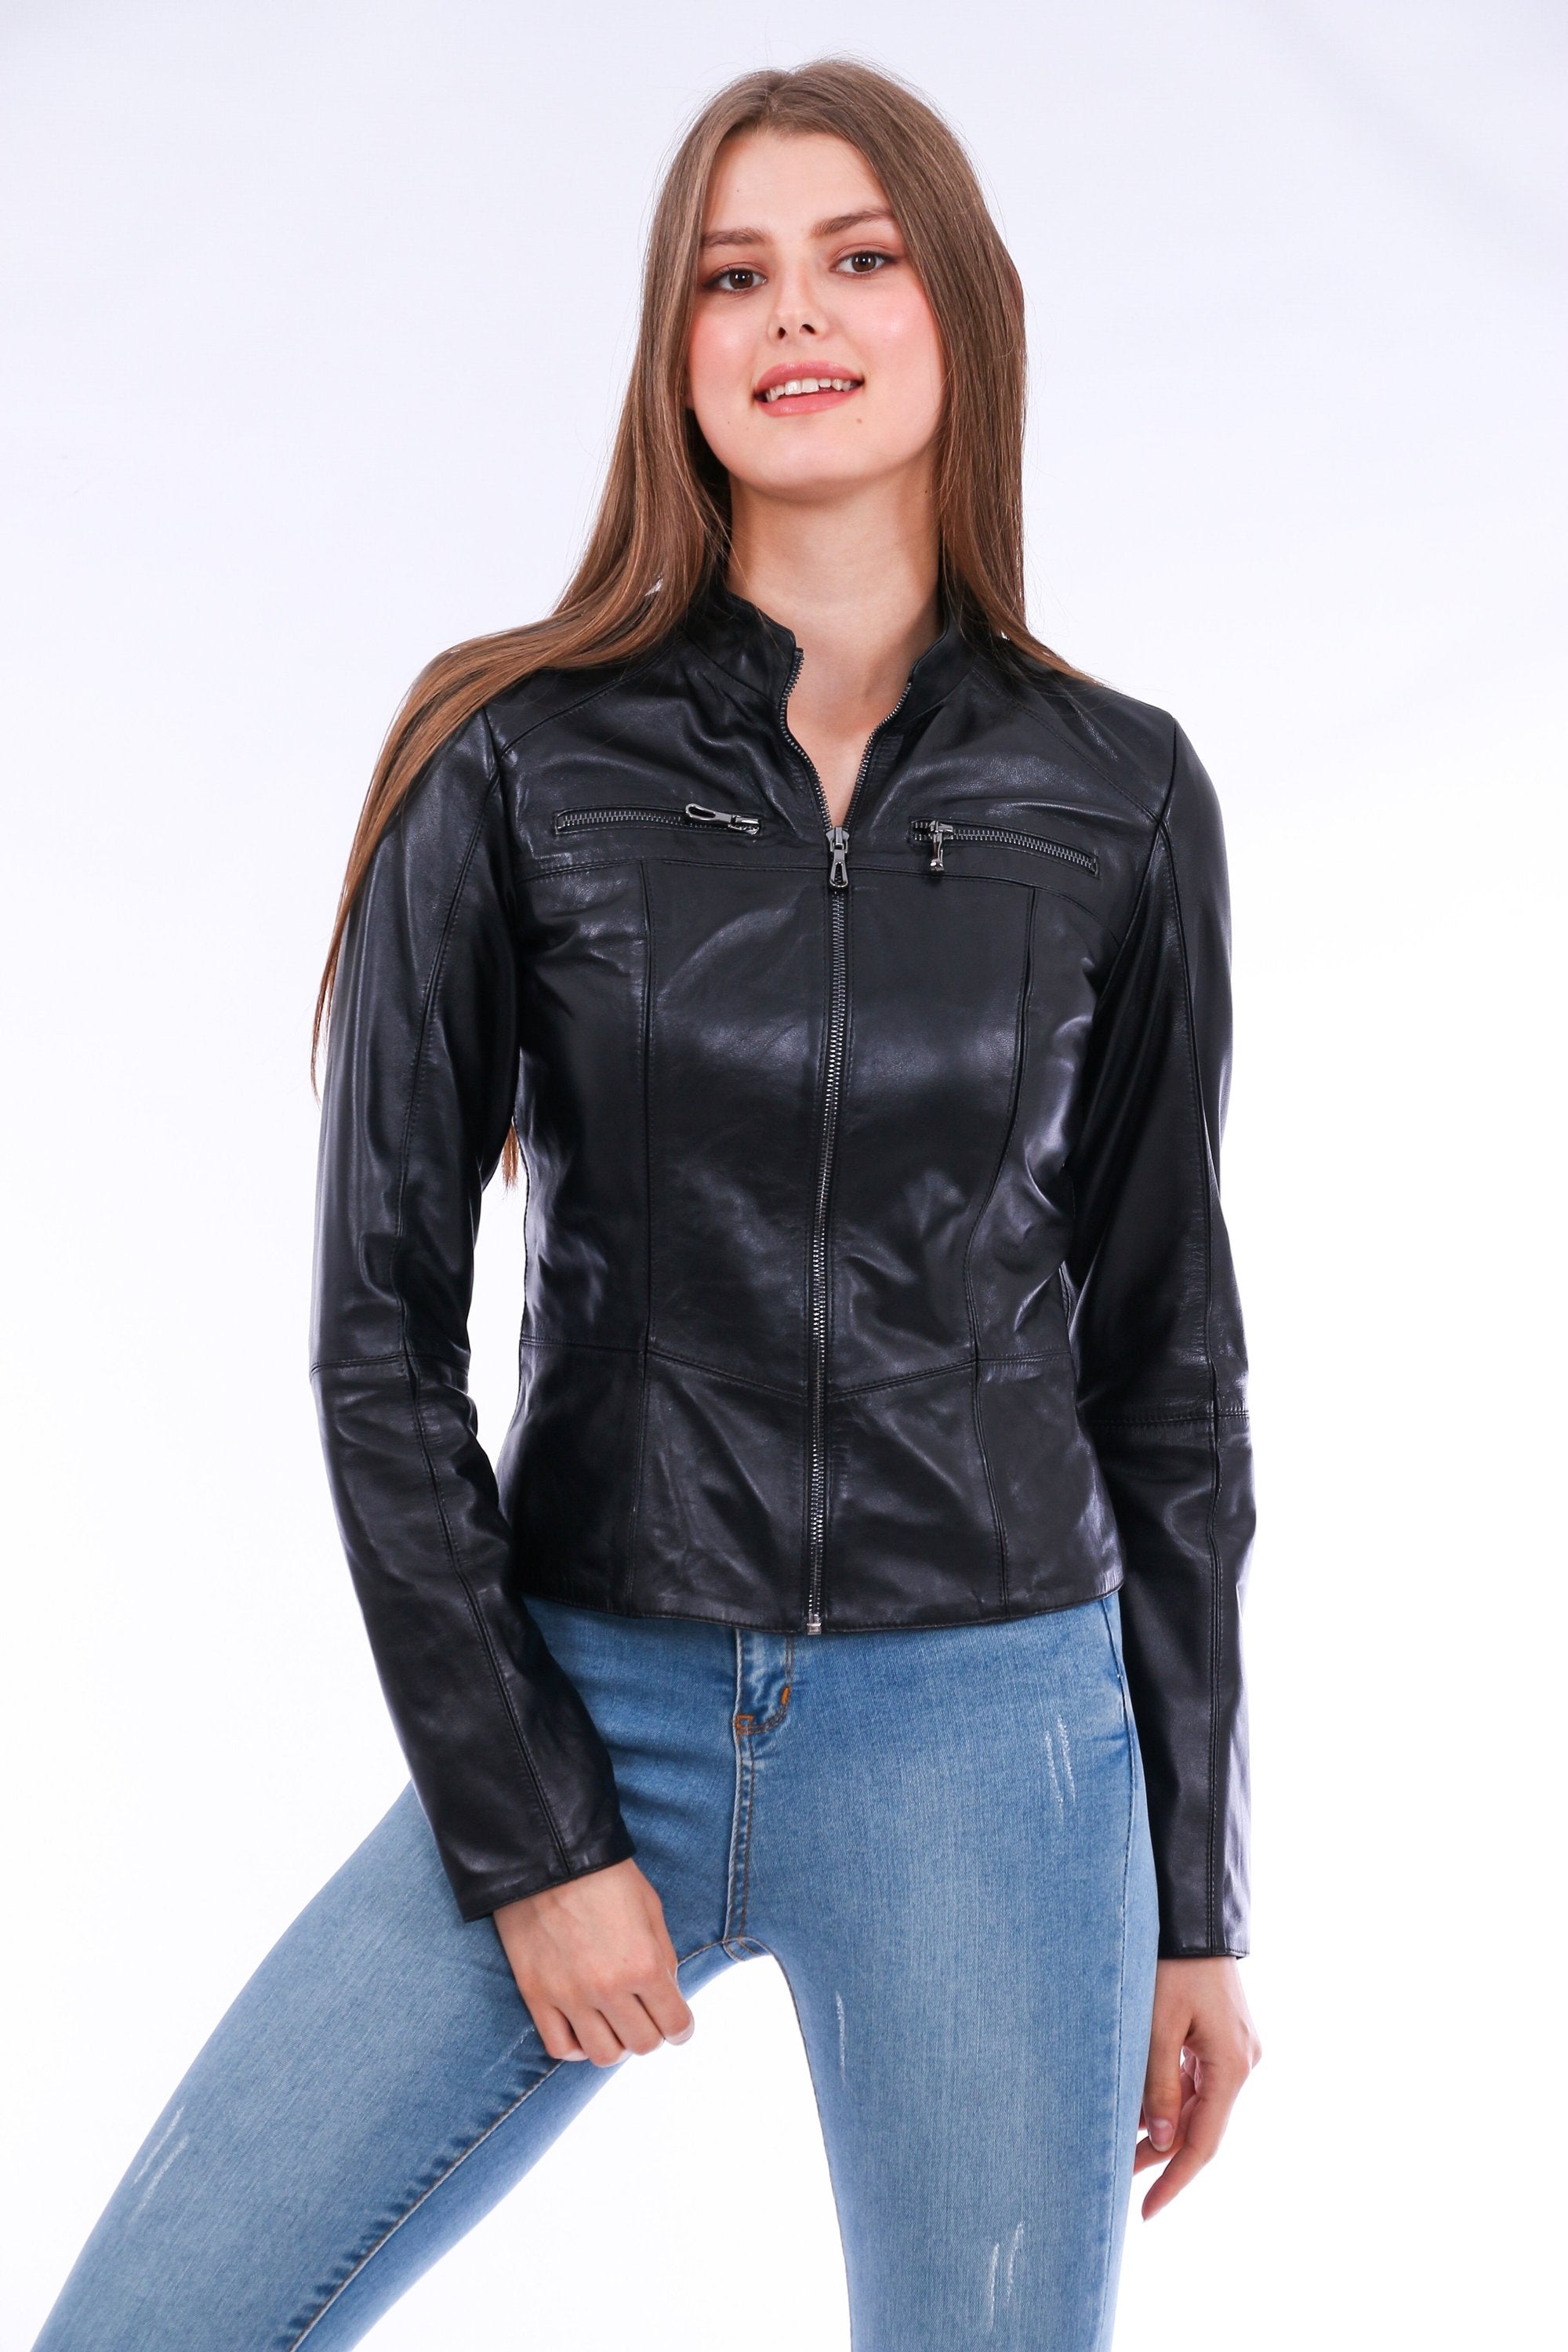 Picture of a Women's Genuine Black Leather Biker Jacket front view zipped again